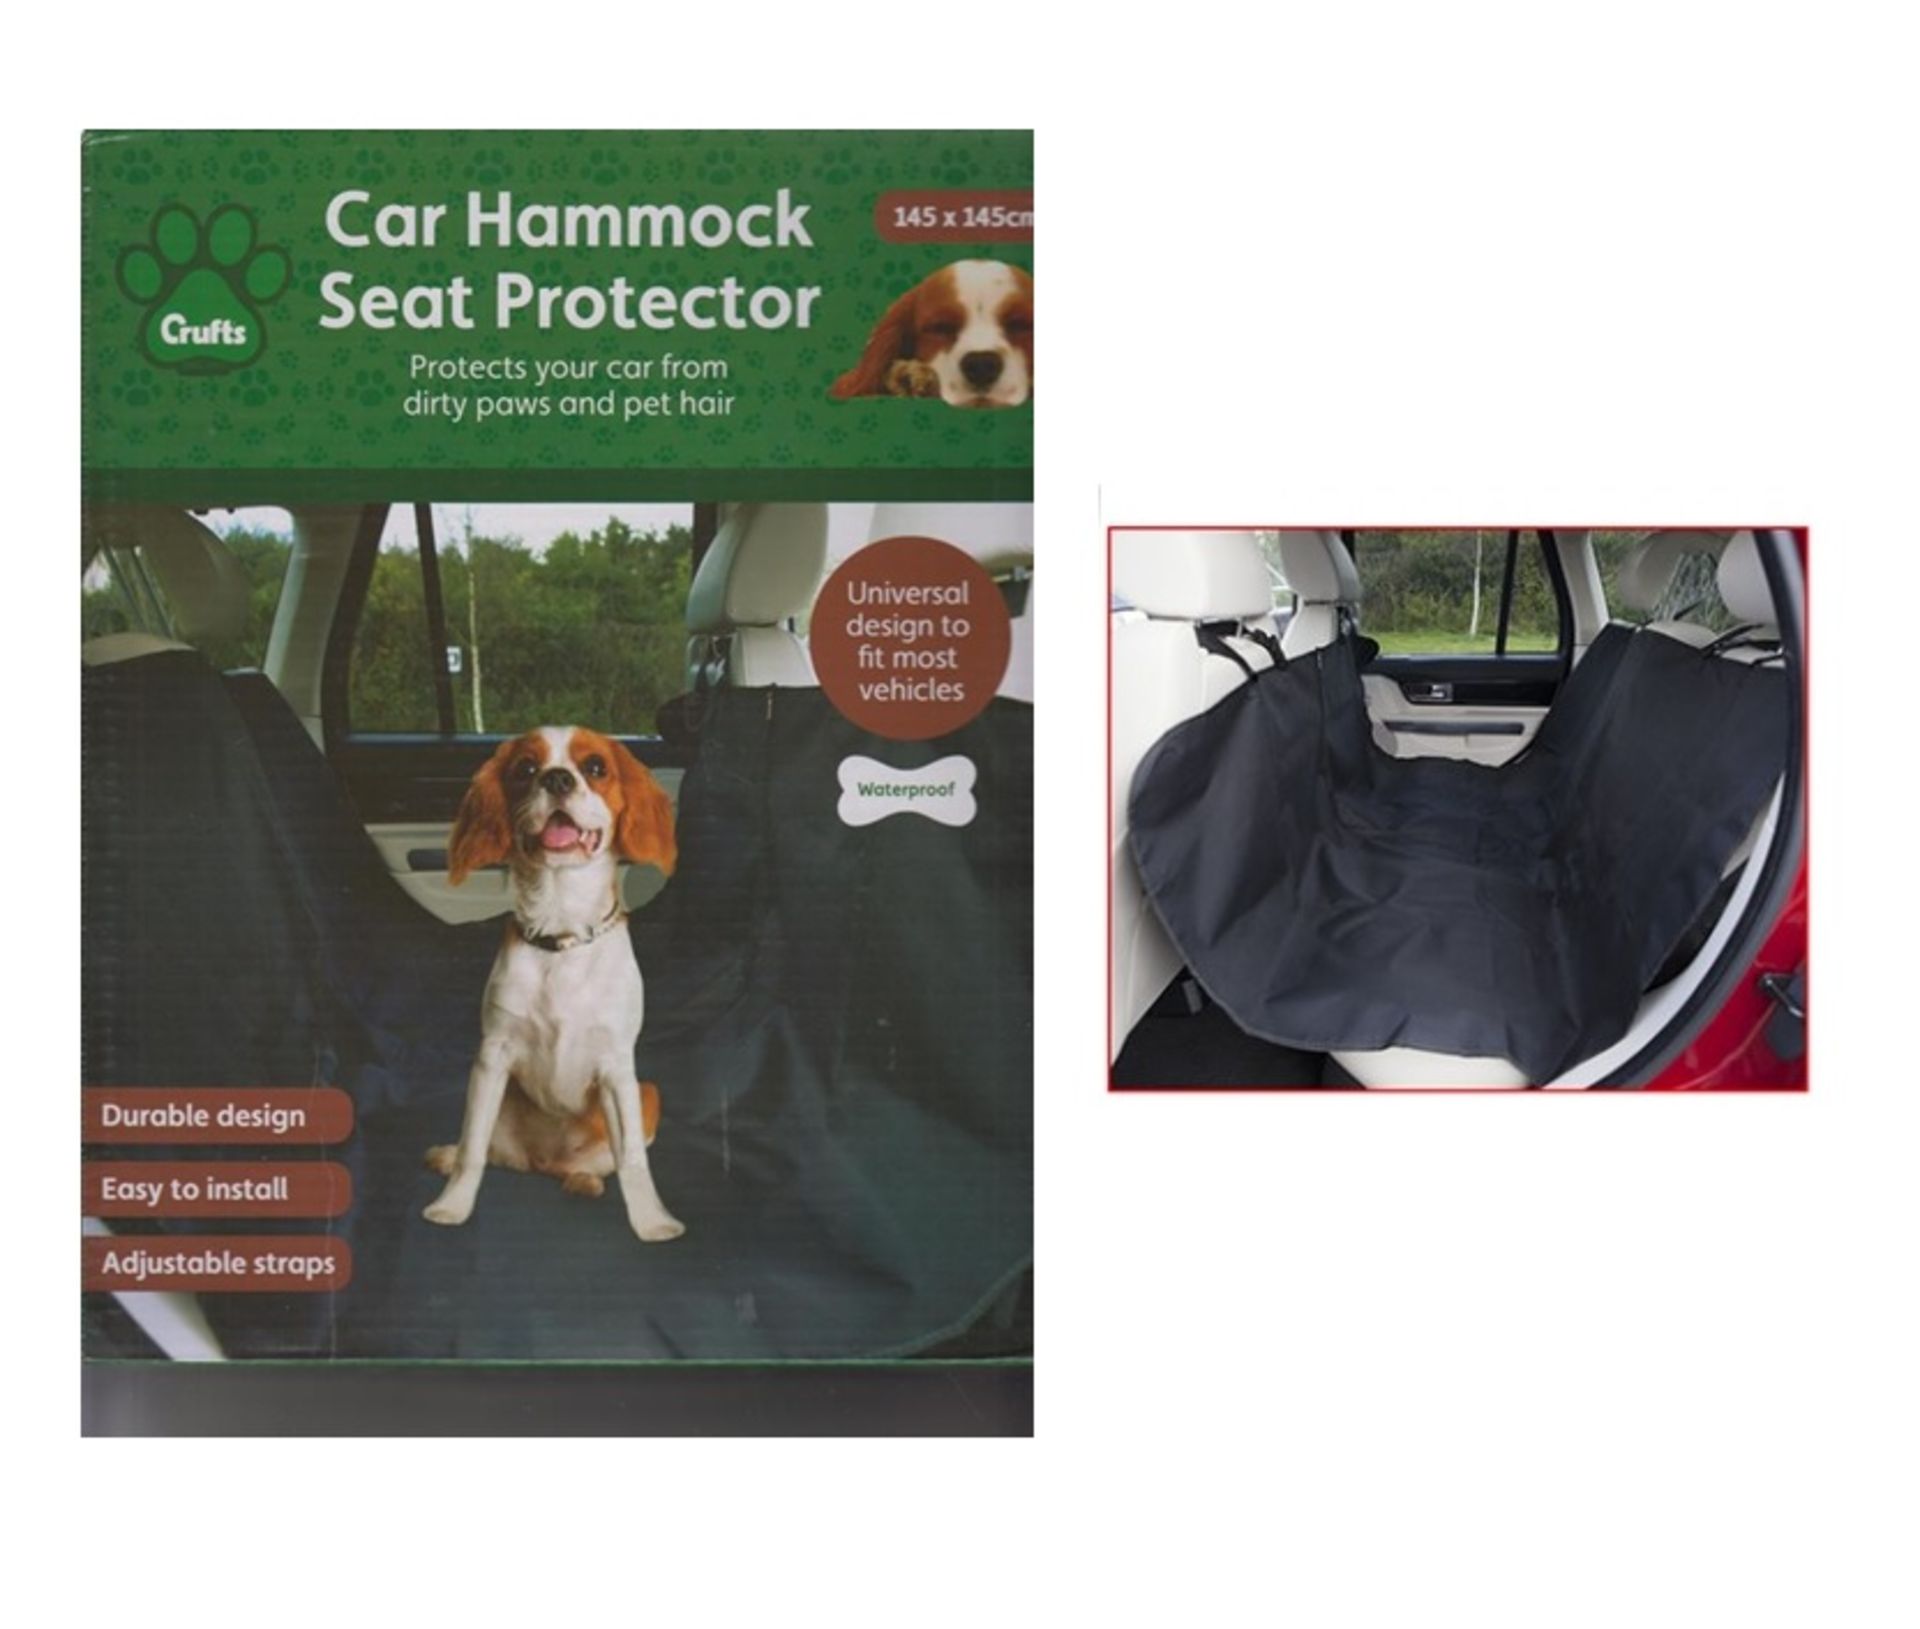 V Brand New Car Hammock Seat Protector For Dogs - Secures in Back Seat Using Four Headrest loops -